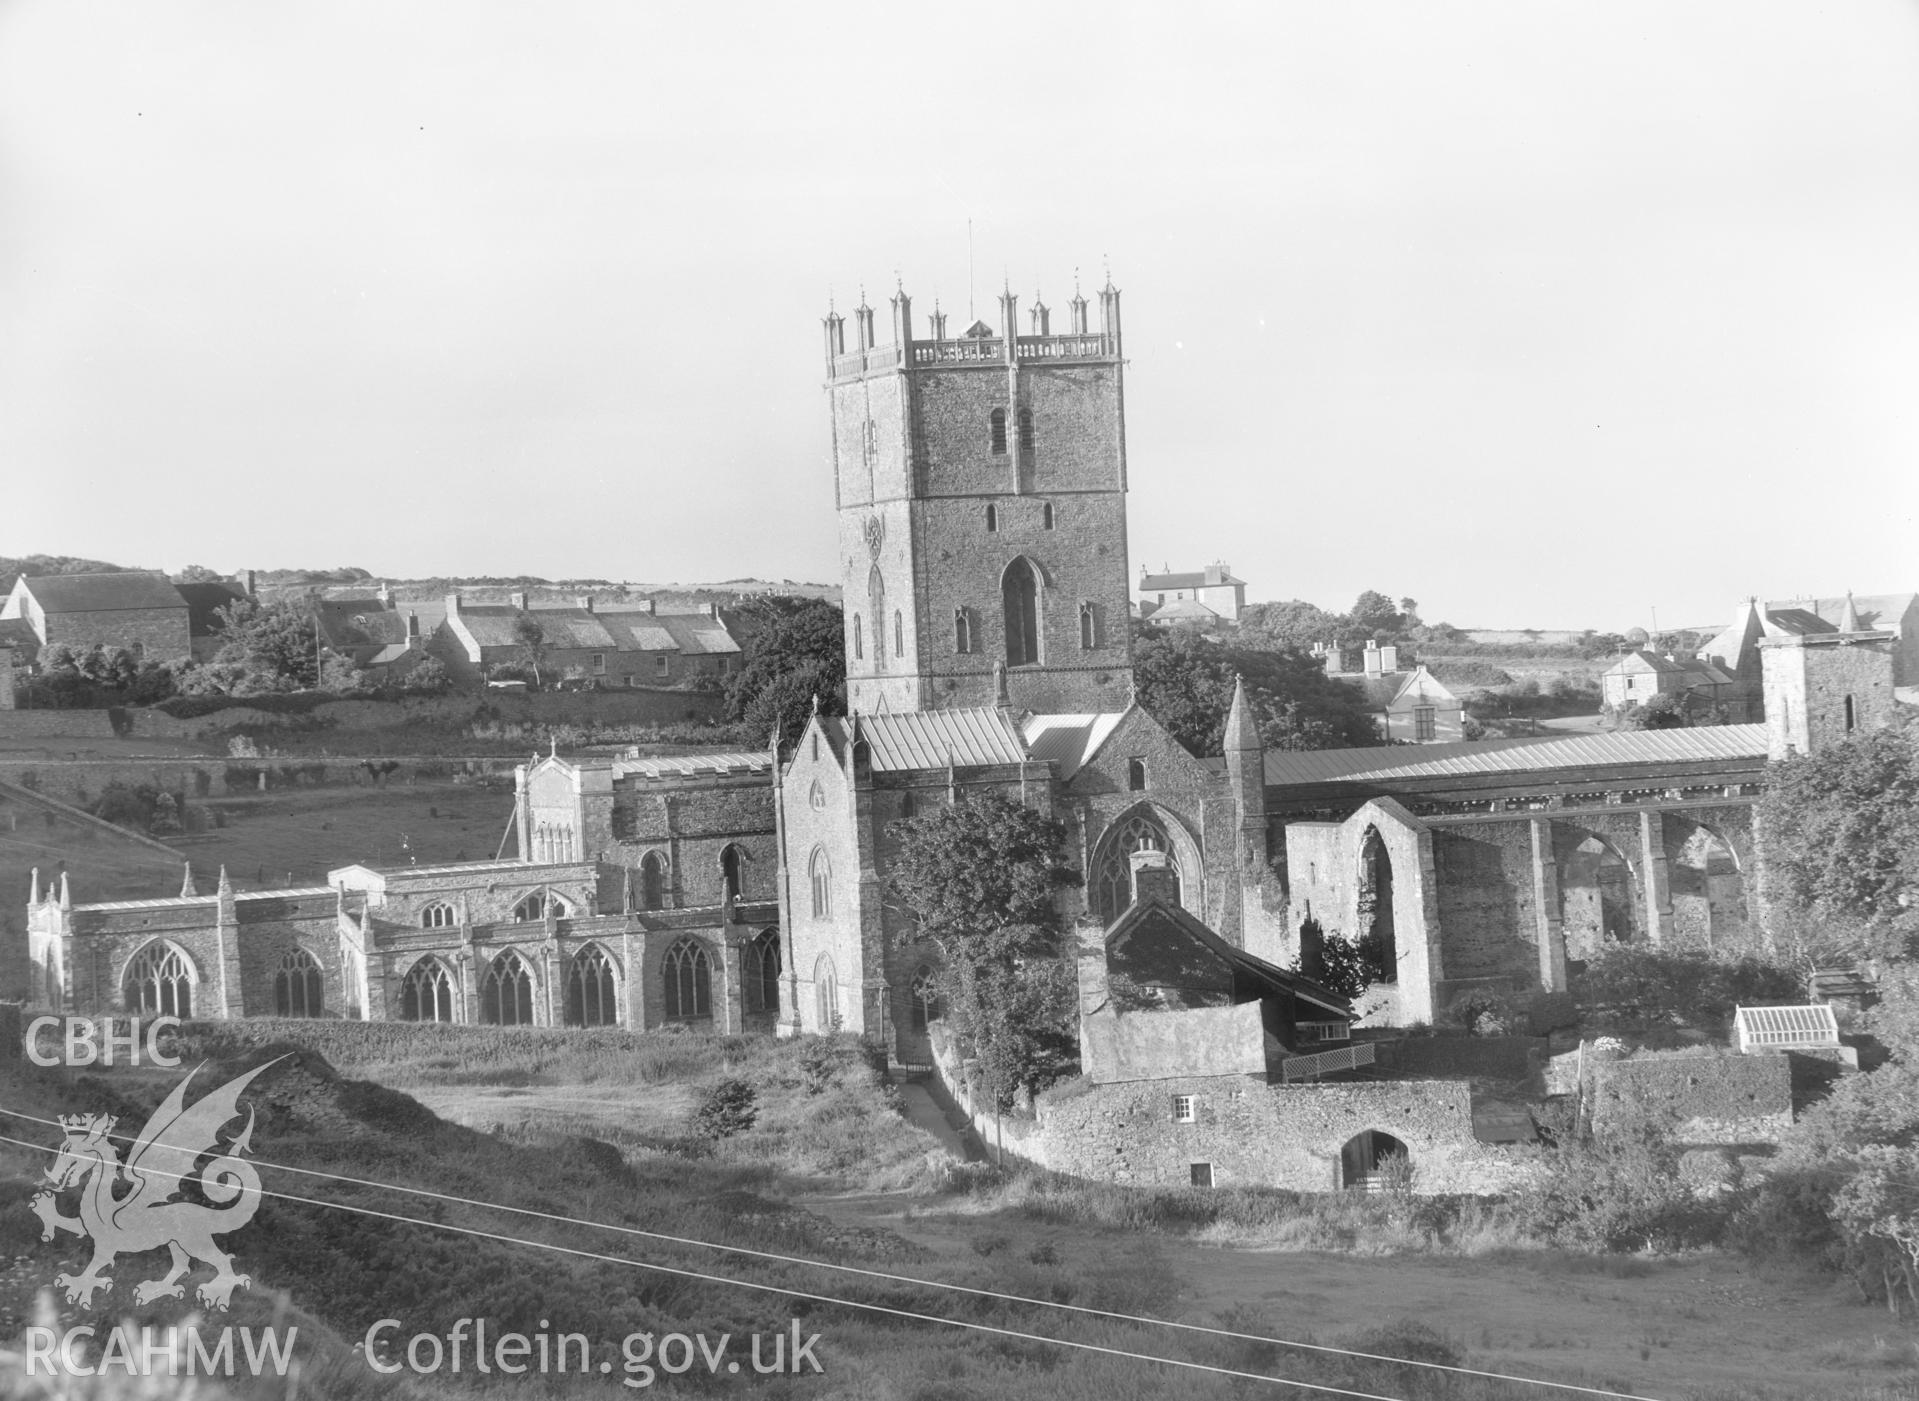 Digital copy of a black and white nitrate negative showing general view of St. David's Cathedral, taken by E.W. Lovegrove, July 1936.